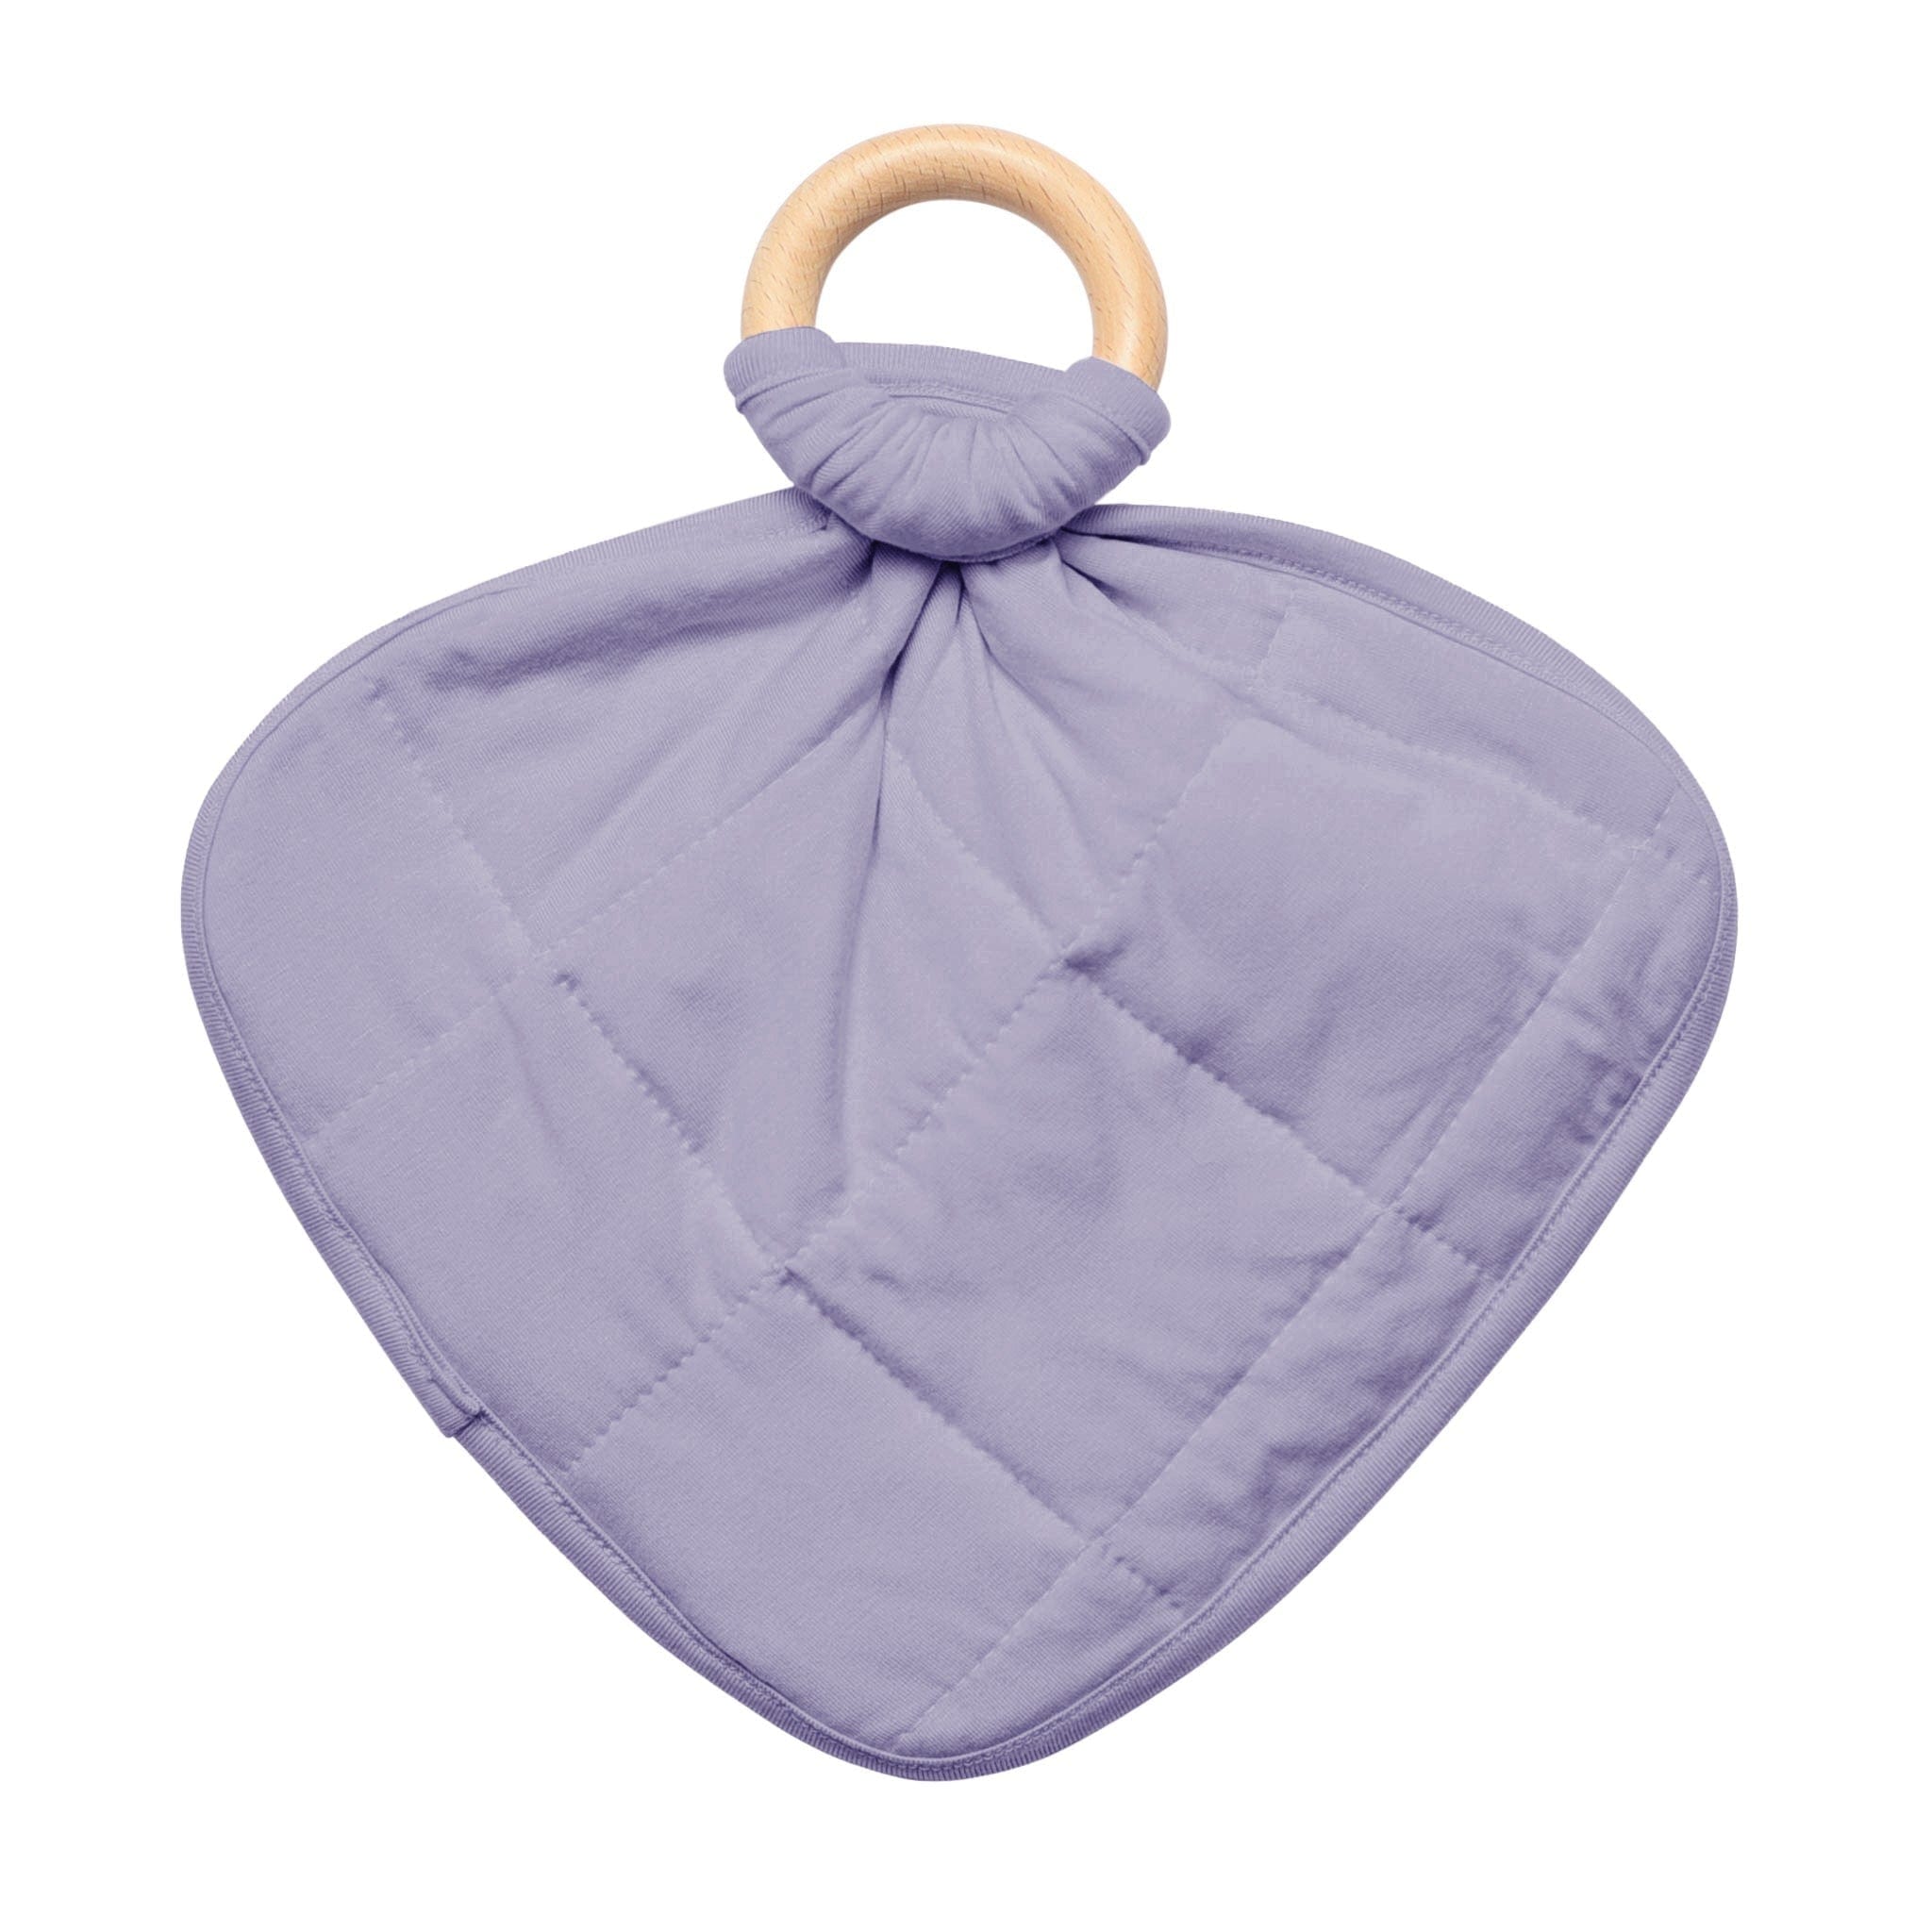 Kyte BABY Lovey Taro / Infant Lovey in Taro with Removable Teething Ring